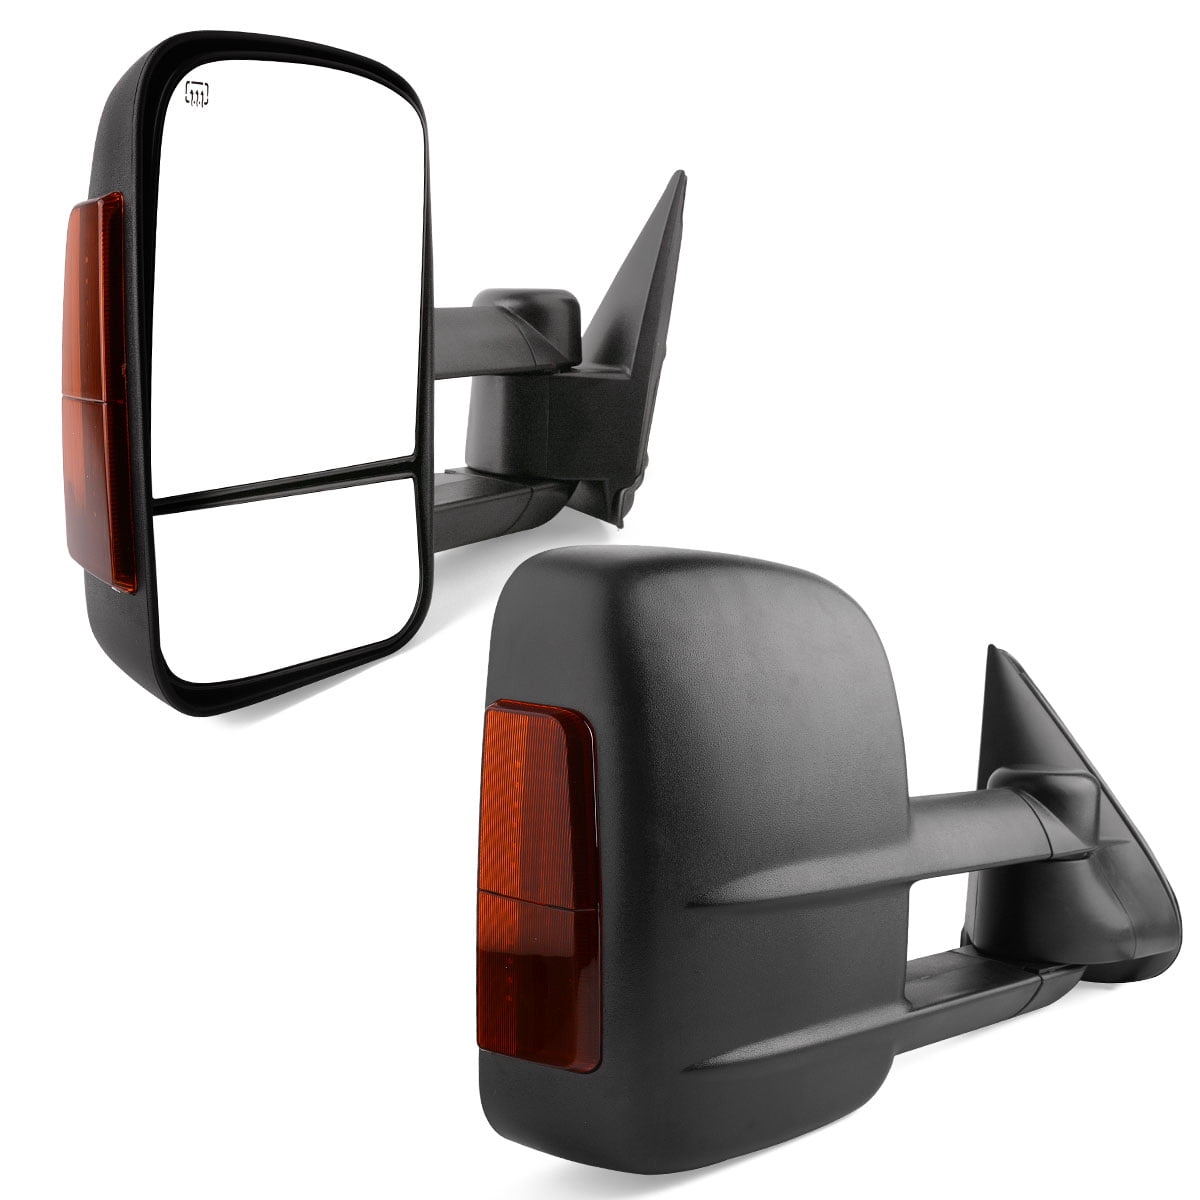 ECCPP Towing Mirror Replacement fit for 2003-2006 Chevrolet Silverado Tahoe Suburban Avalanche GMC Sierra Yukon Cadillac Escalade Power Heated LED Signal Clearance Light Pair Mirrors 050923-5211-1513421 07 CLASSIC 